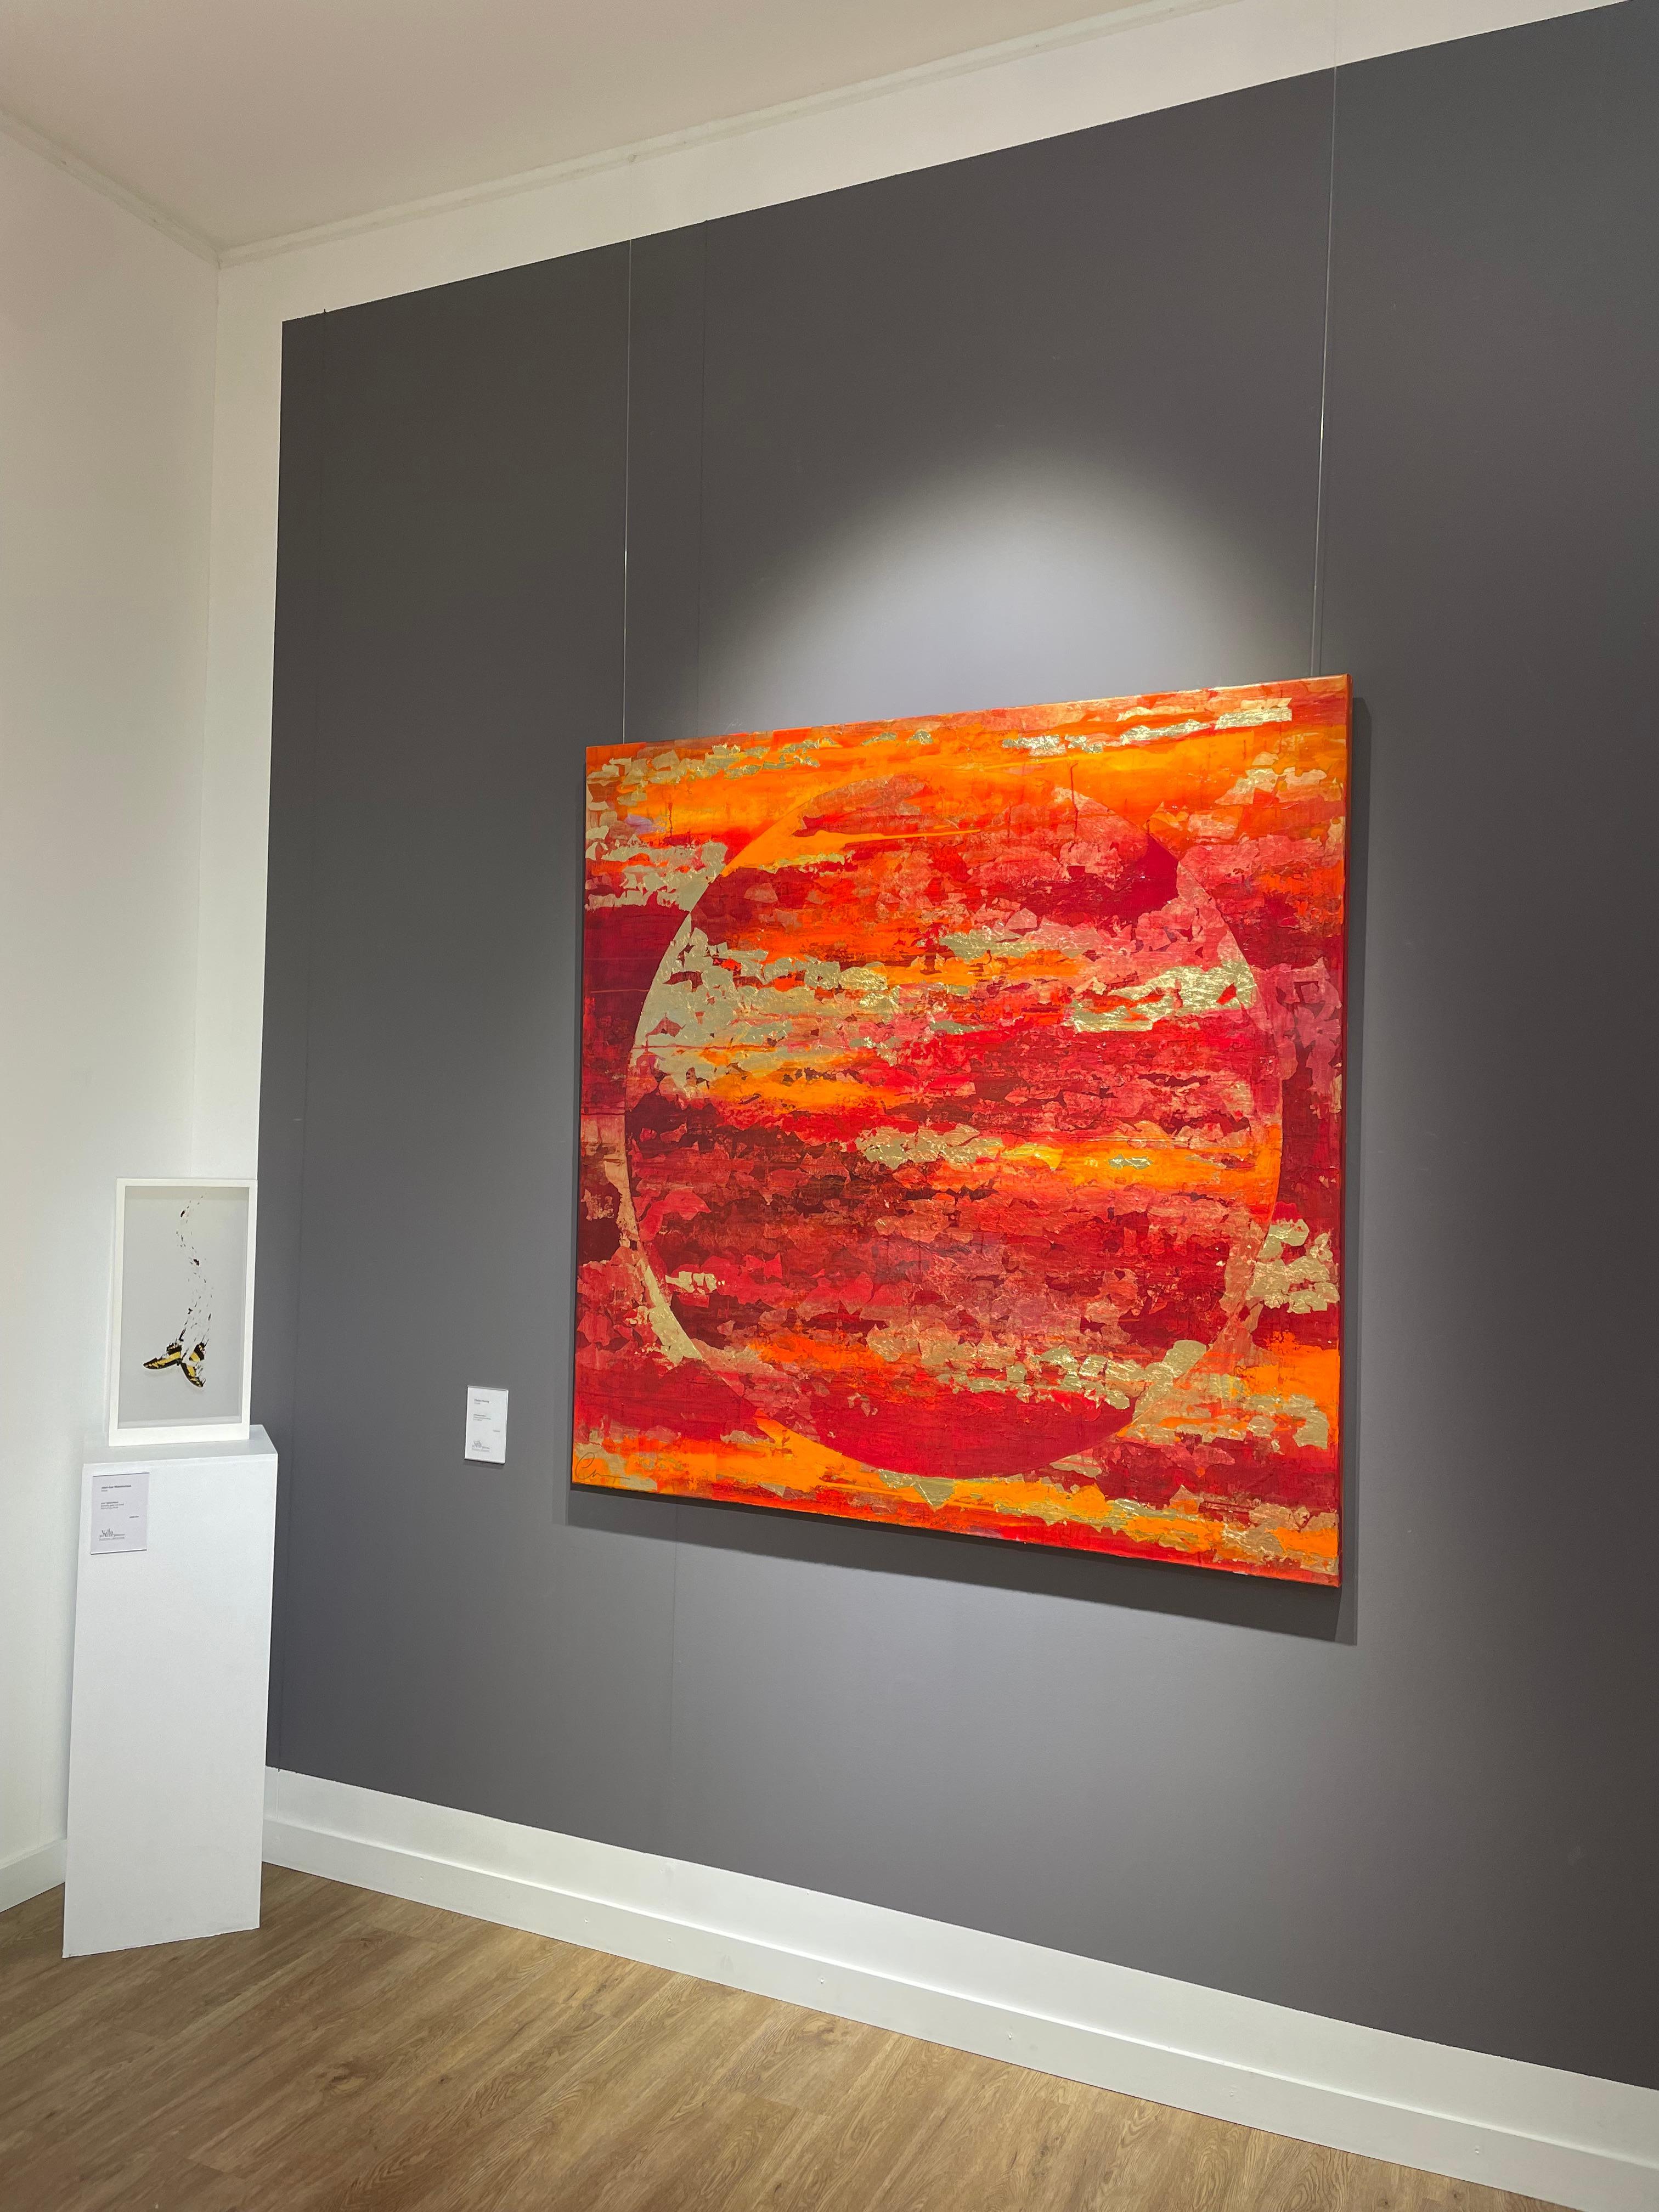 Red Autumn Moon - 21st Cent., Oil, abstract, night, red, gold leaf - Painting by Chelsea Davine